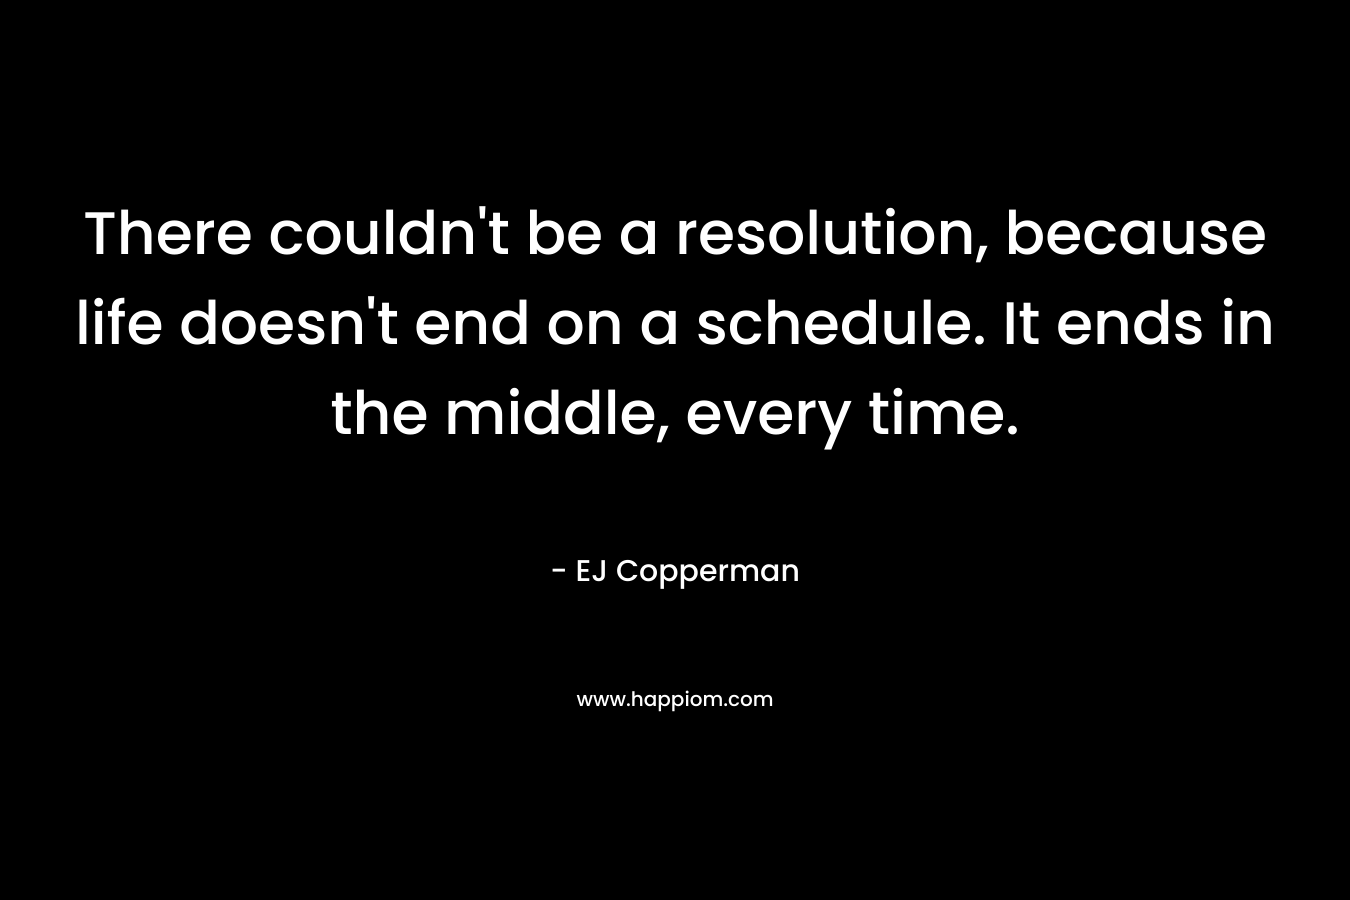 There couldn't be a resolution, because life doesn't end on a schedule. It ends in the middle, every time.